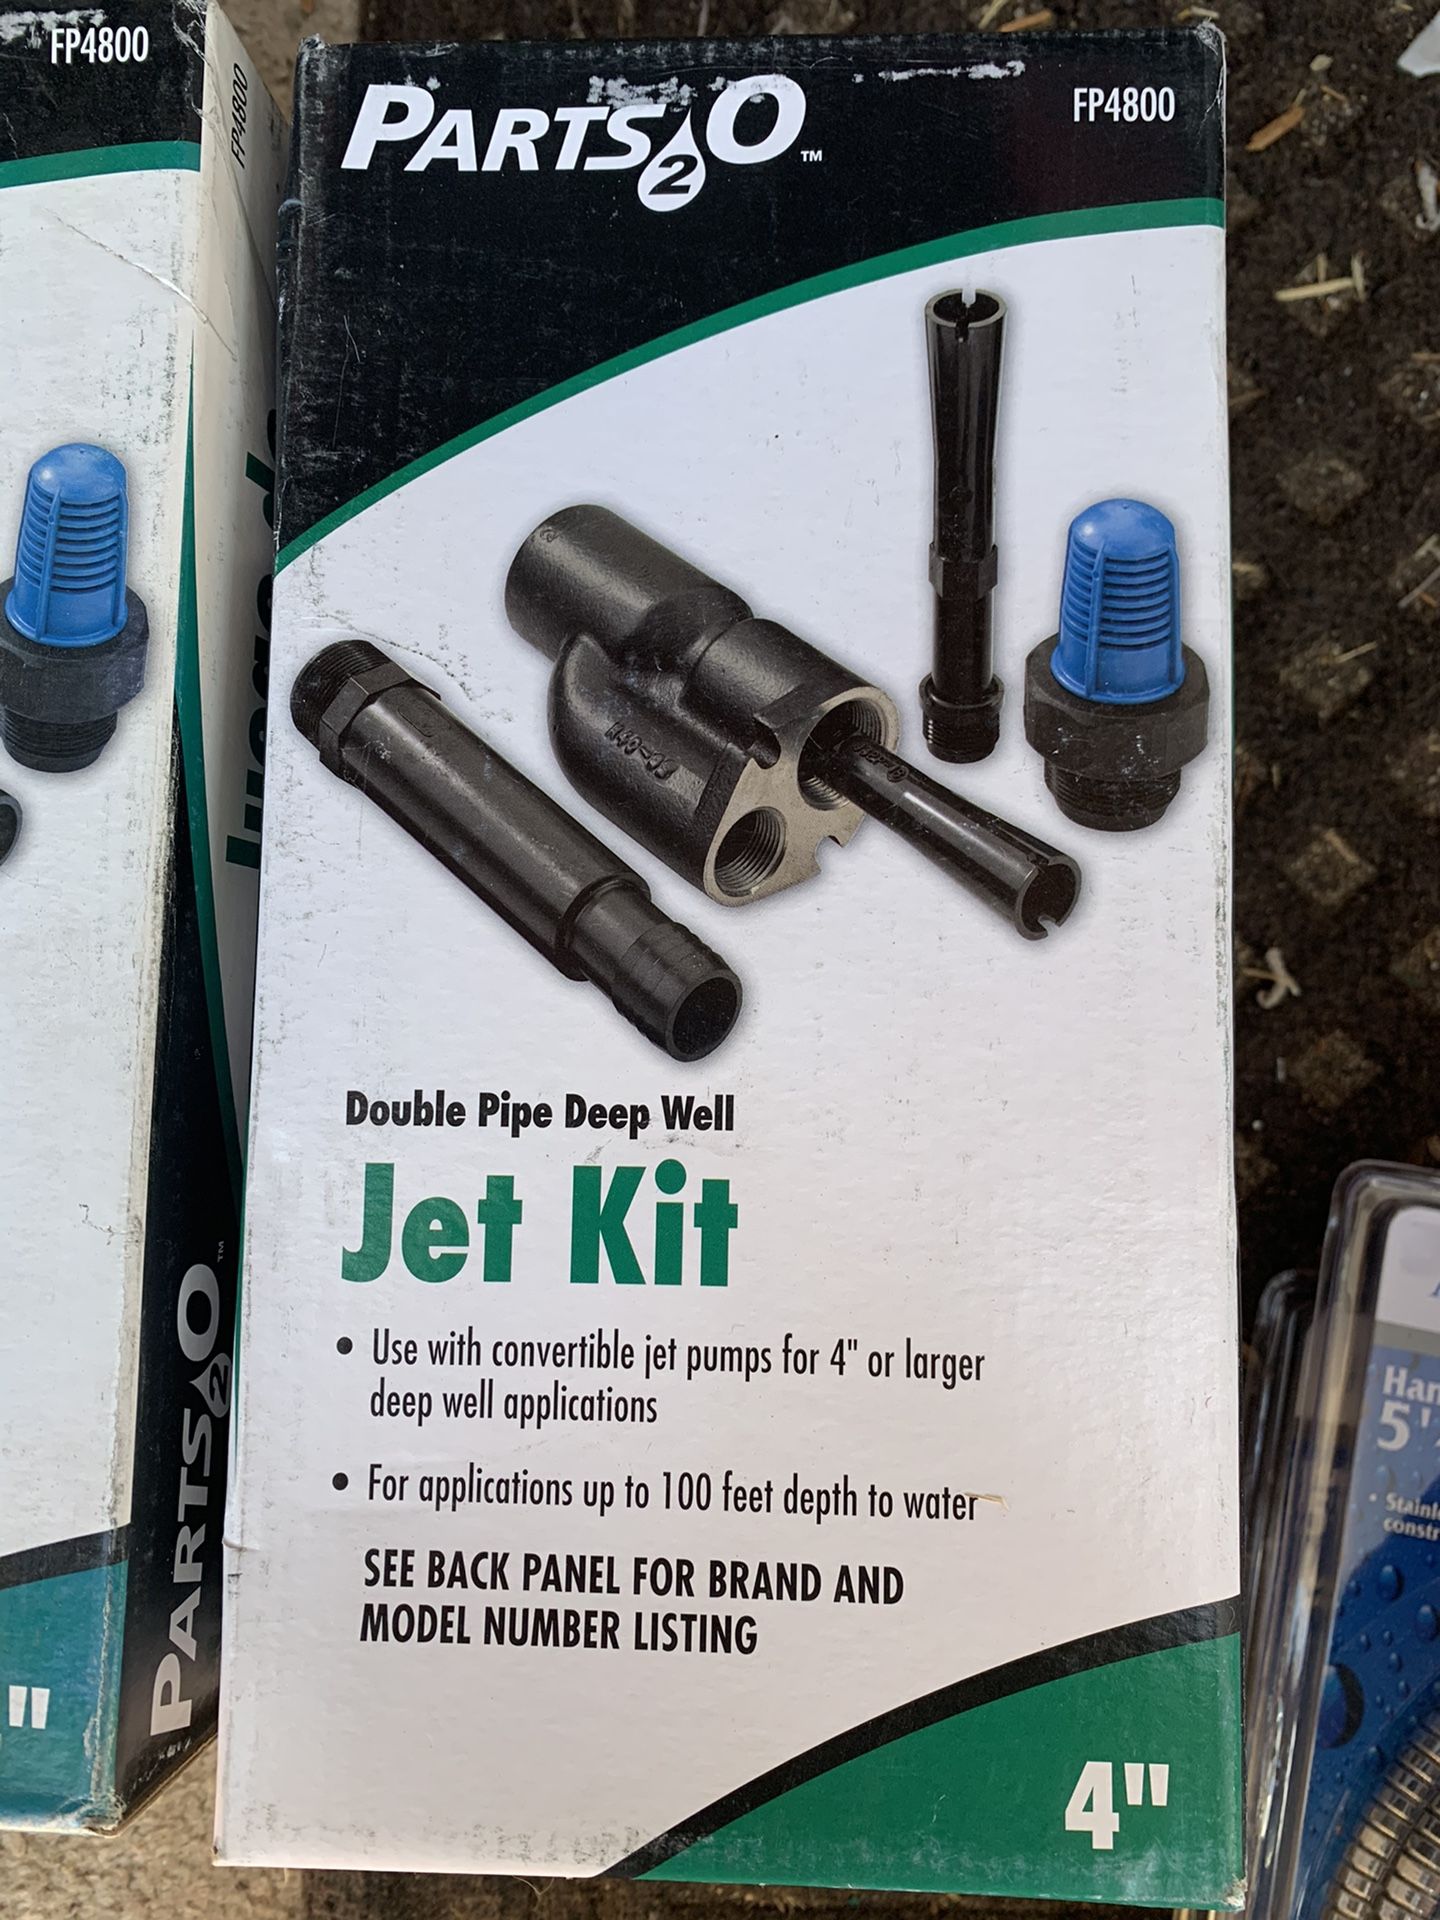 Well jet kit for ponds or small lake